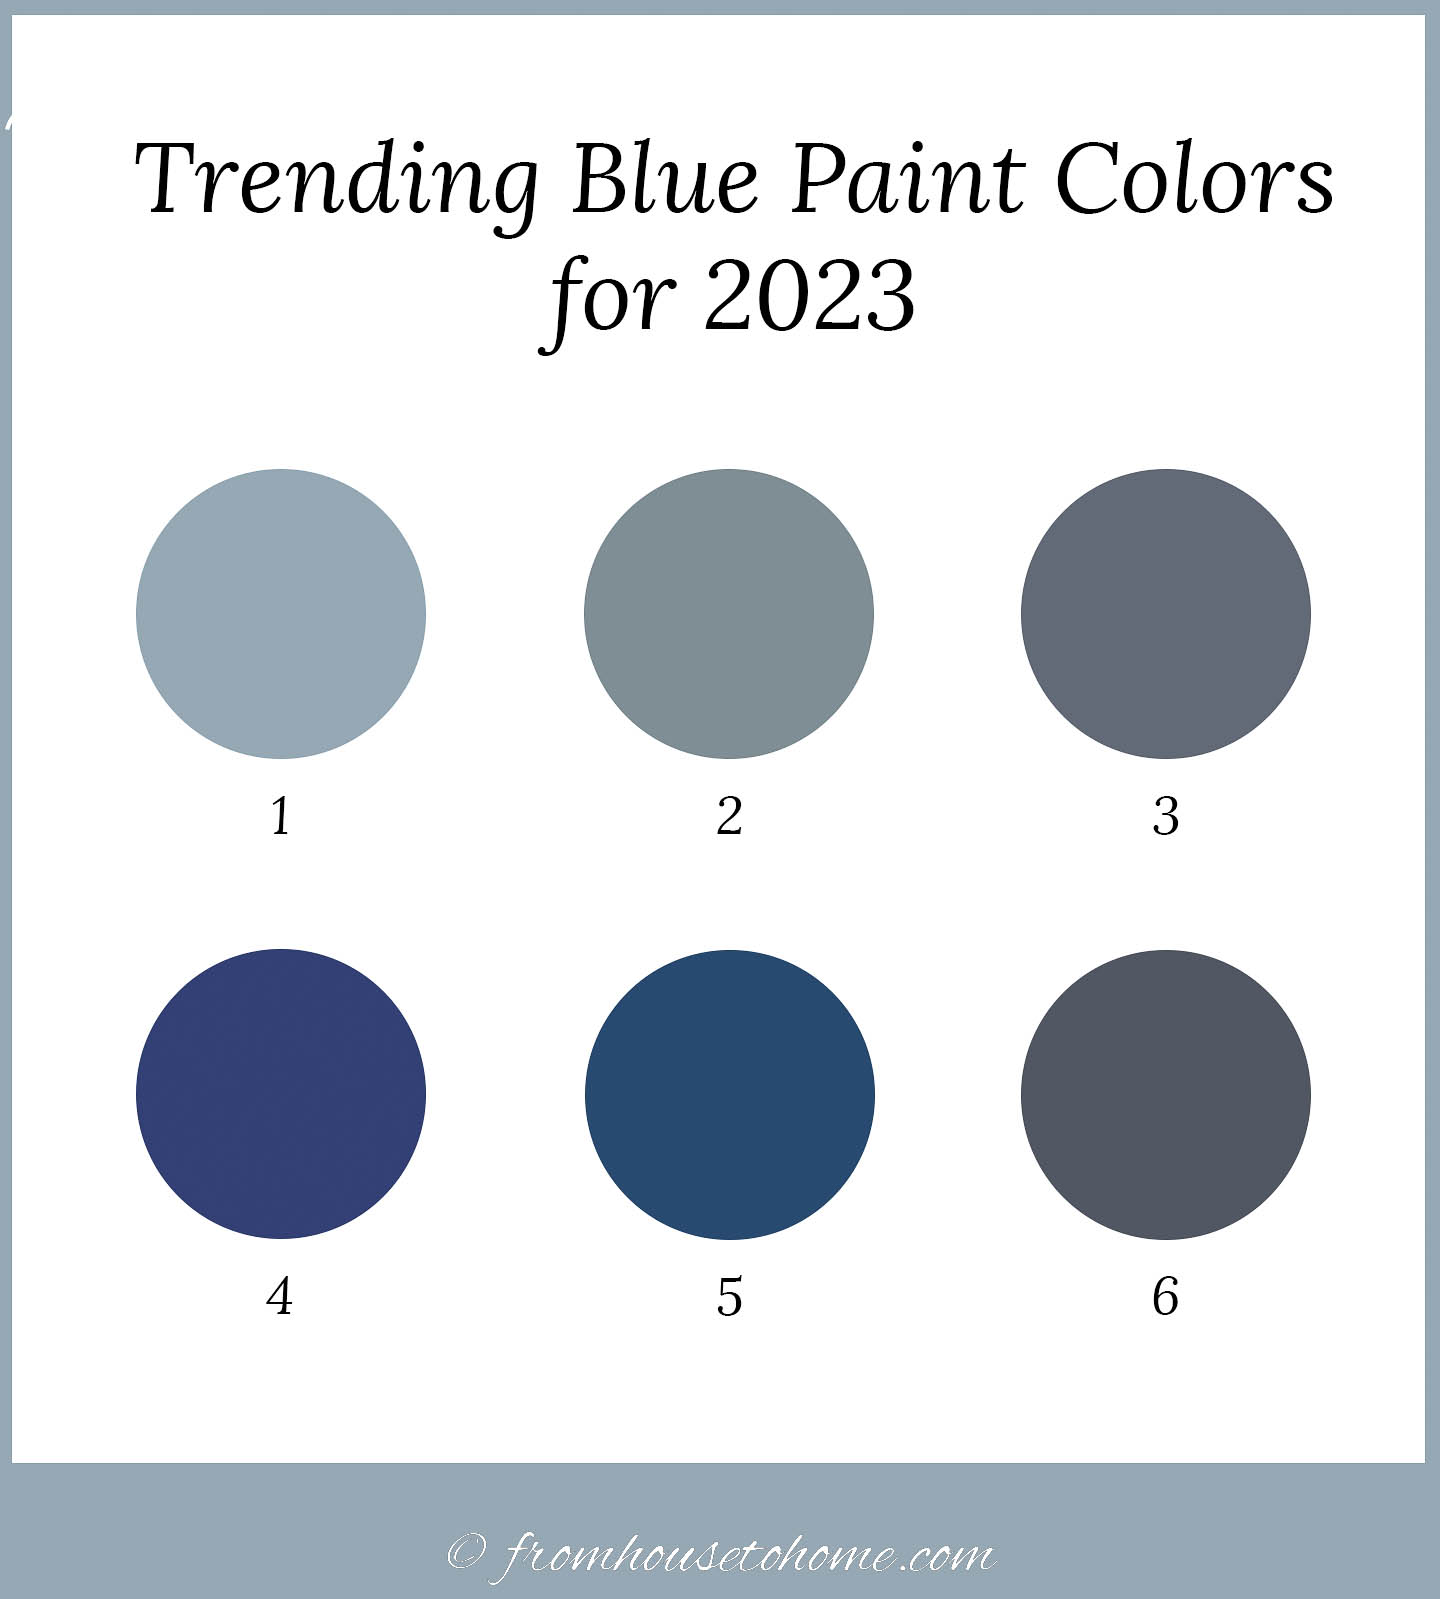 6 swatches of trending blue paint colors